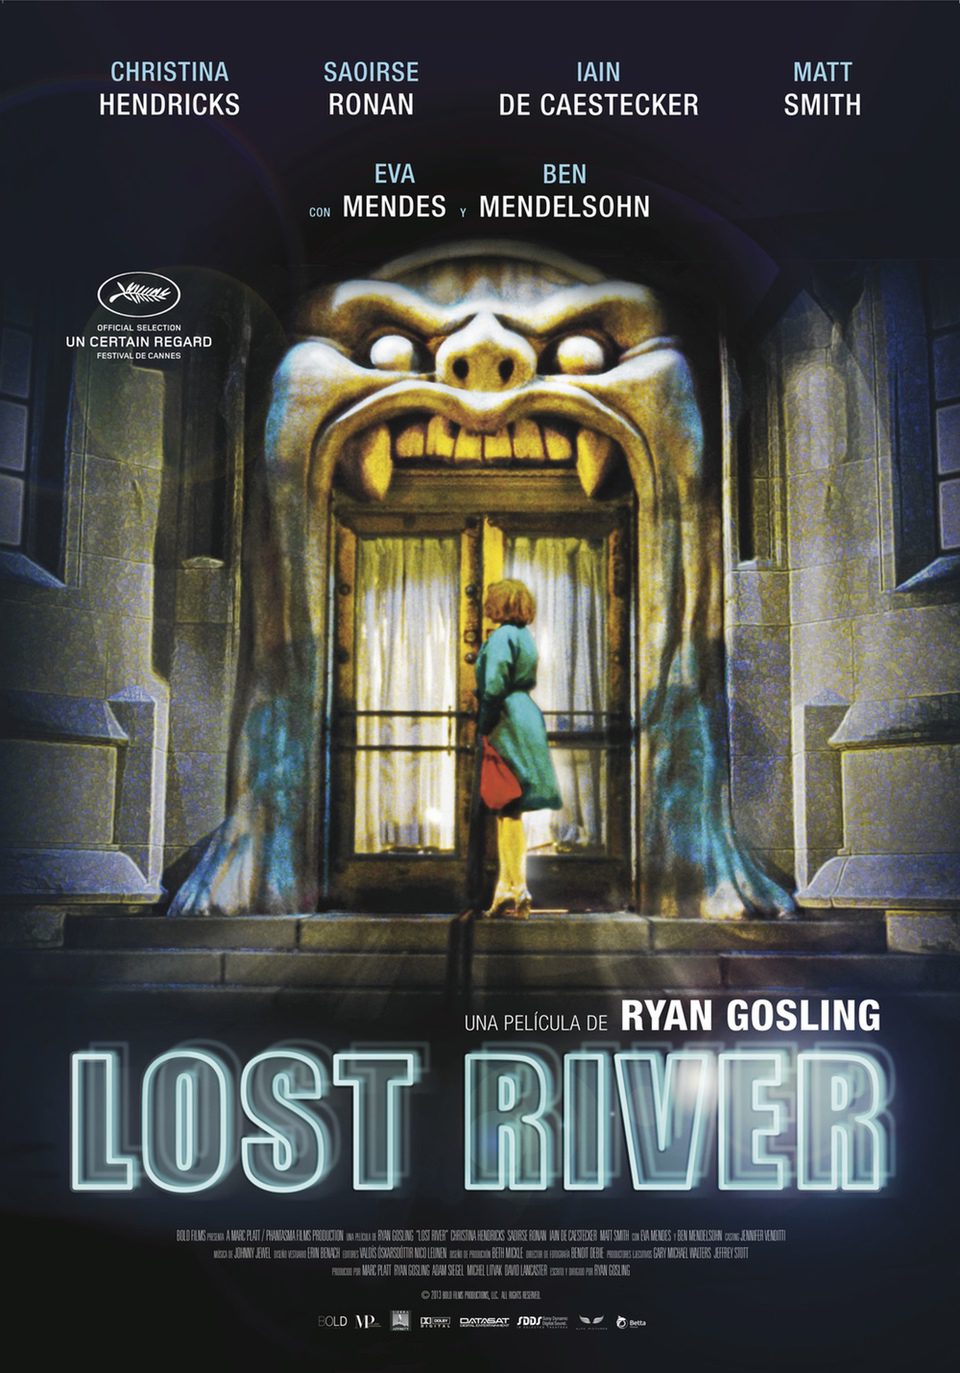 España poster for Lost River